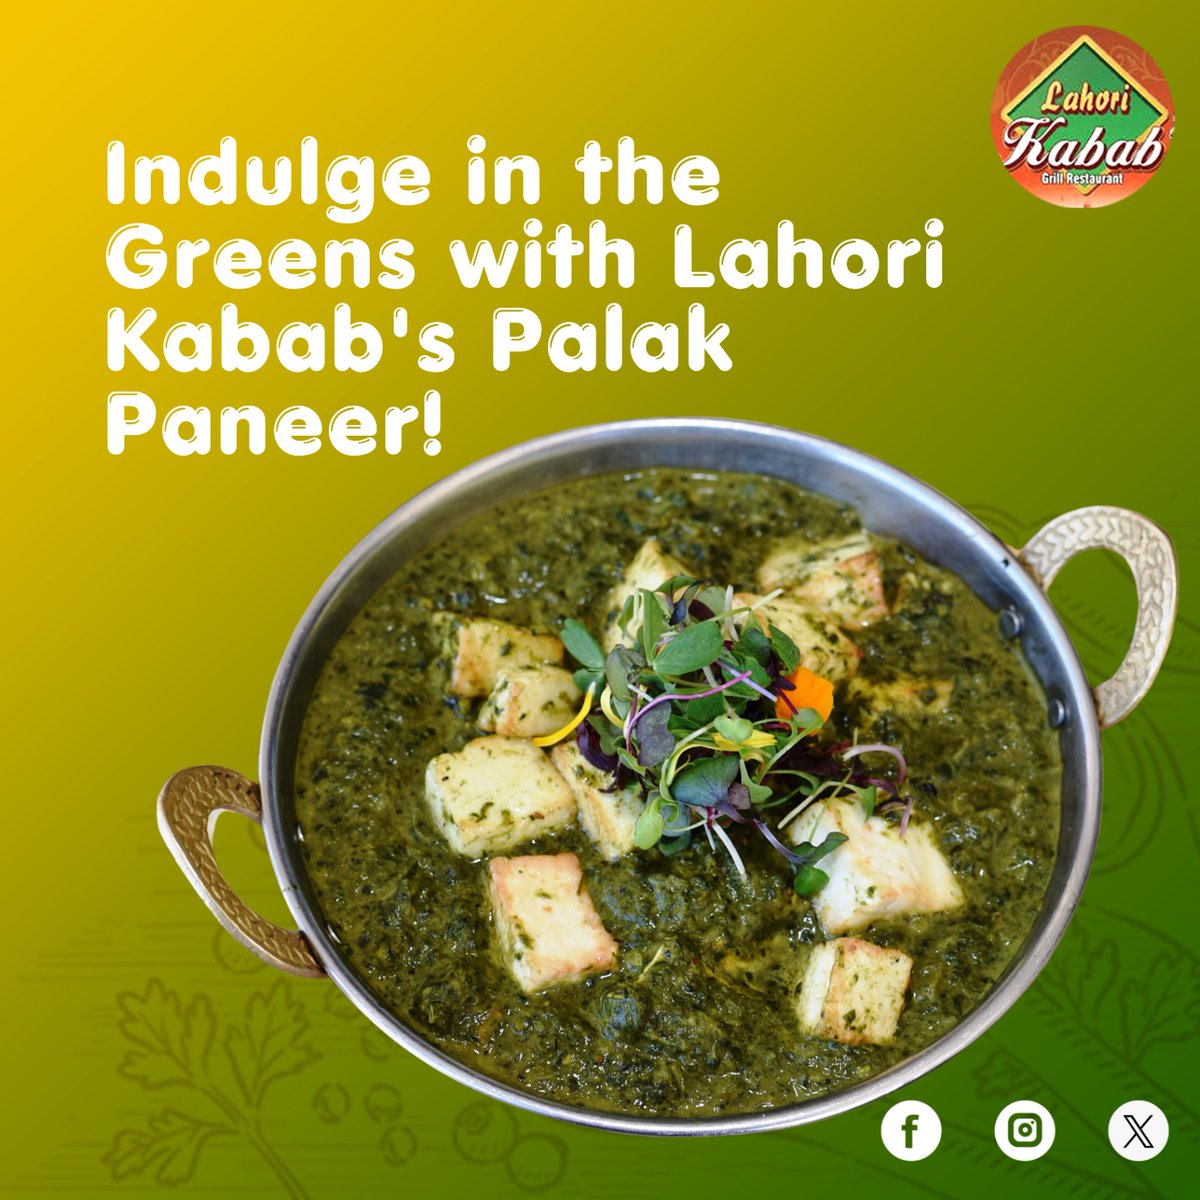 Let your taste buds dance to the rich and creamy texture of our Palak Paneer, where fresh spinach meets soft paneer,  offering a dish full of flavor and nourishment!

Call us Now: +1 717-547-6062
#lahorikababandgrill #Lahoriflavors #PalakPaneer #fresh #spices #greens #spinach